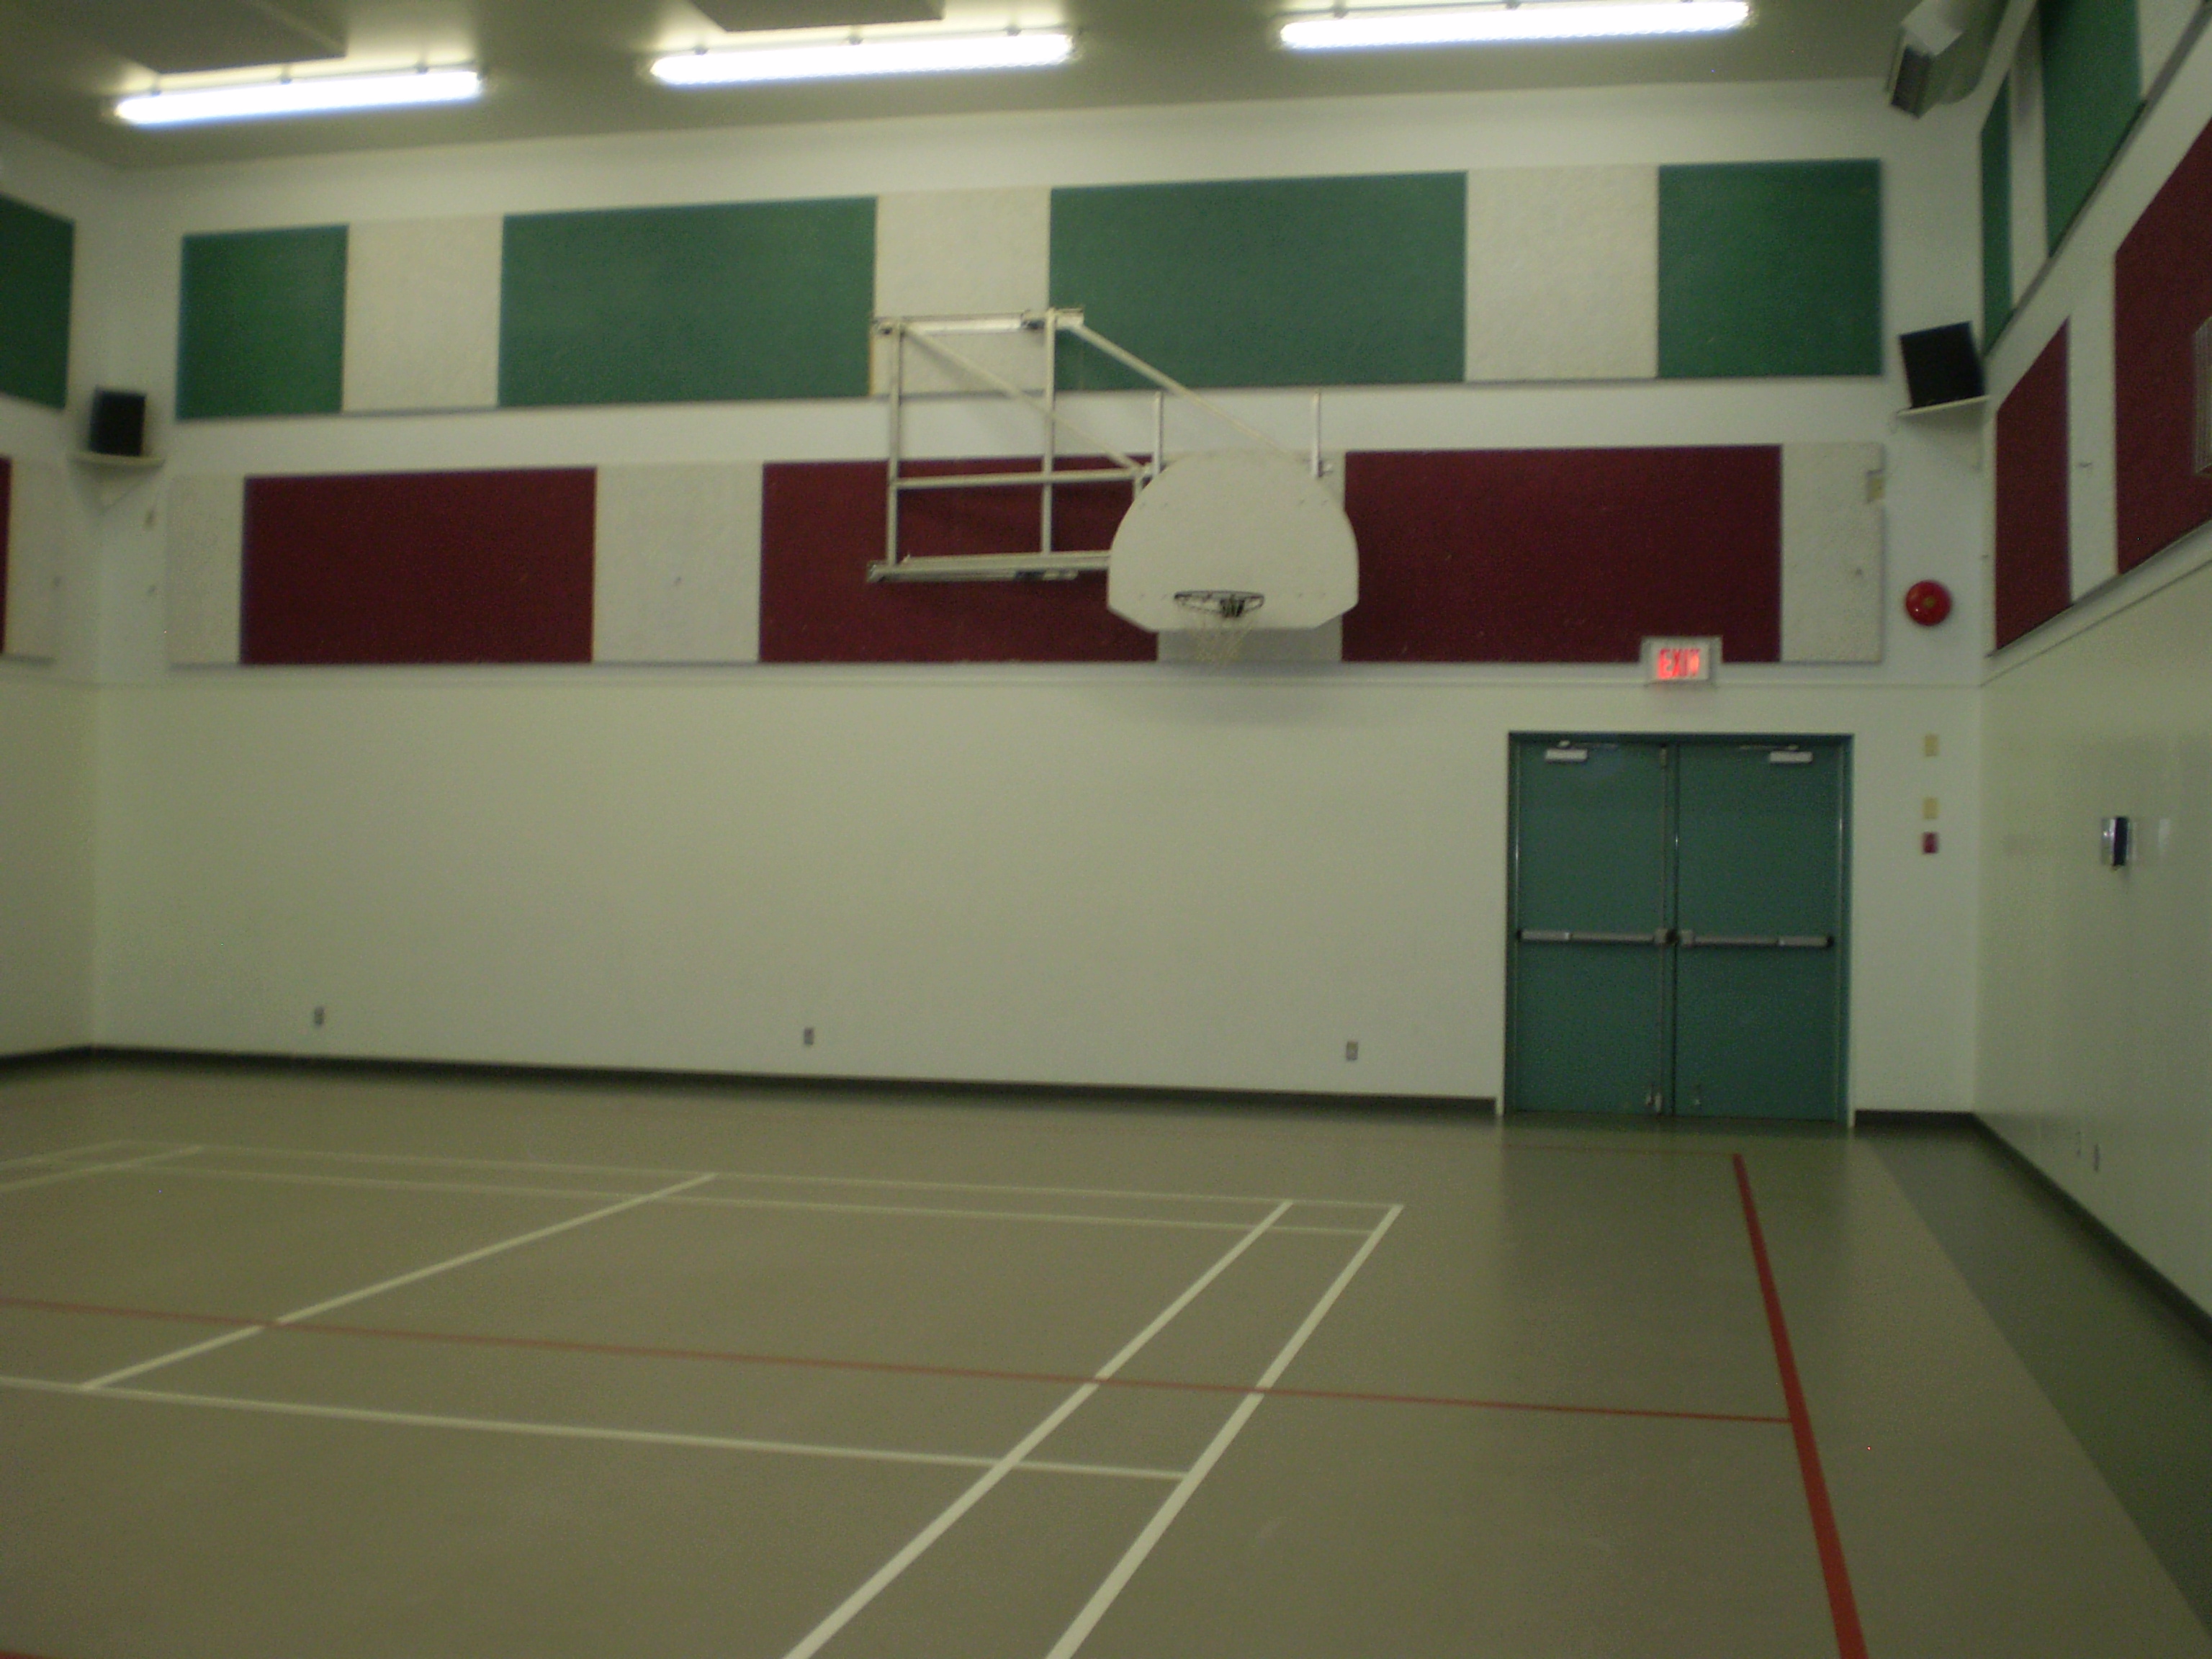 Gym for kid's party or games